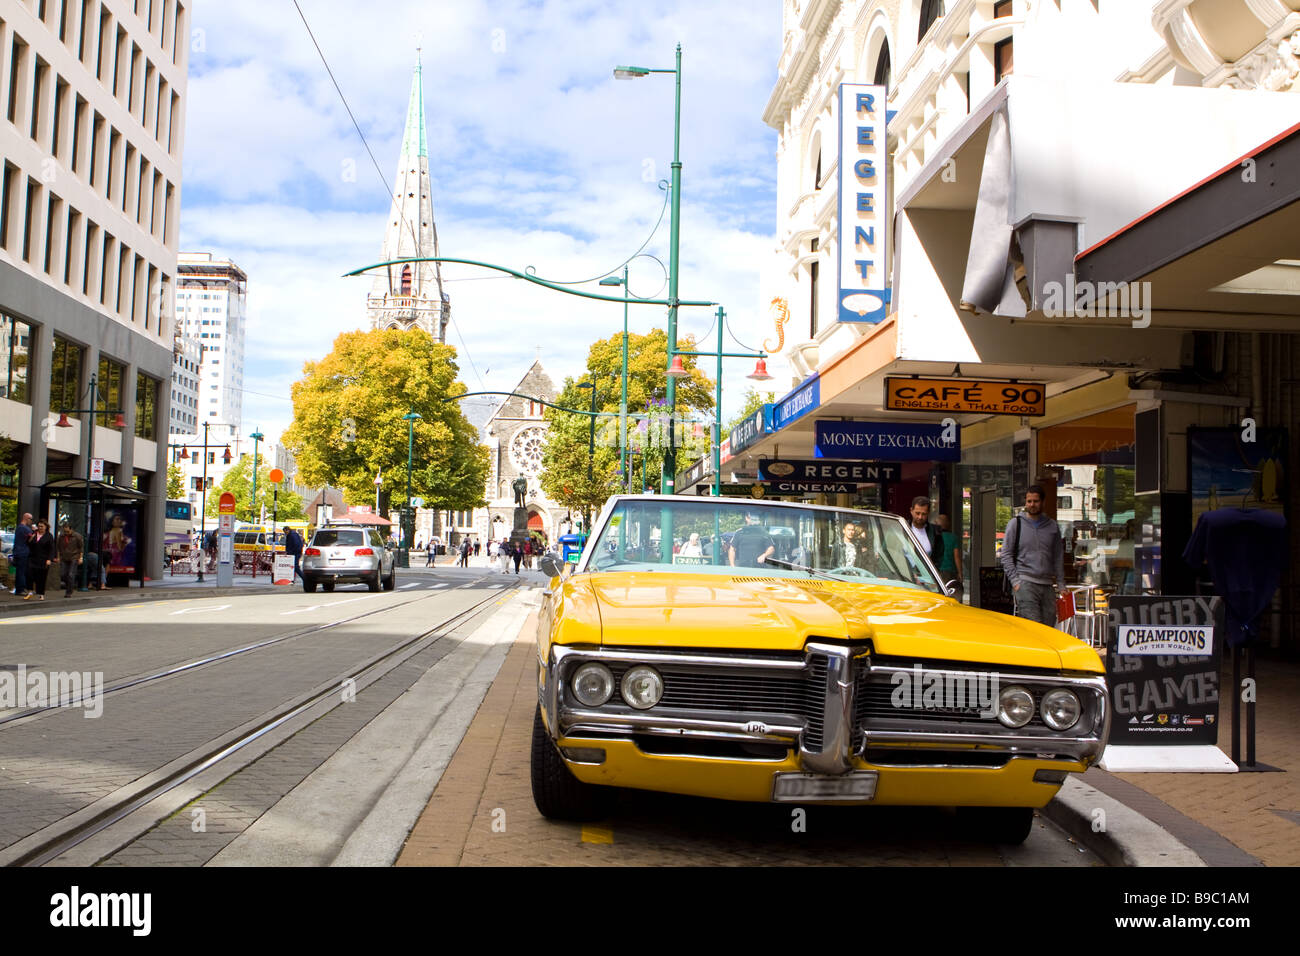 Pontiac Car in Cathedral Square Christchurch Stock Photo